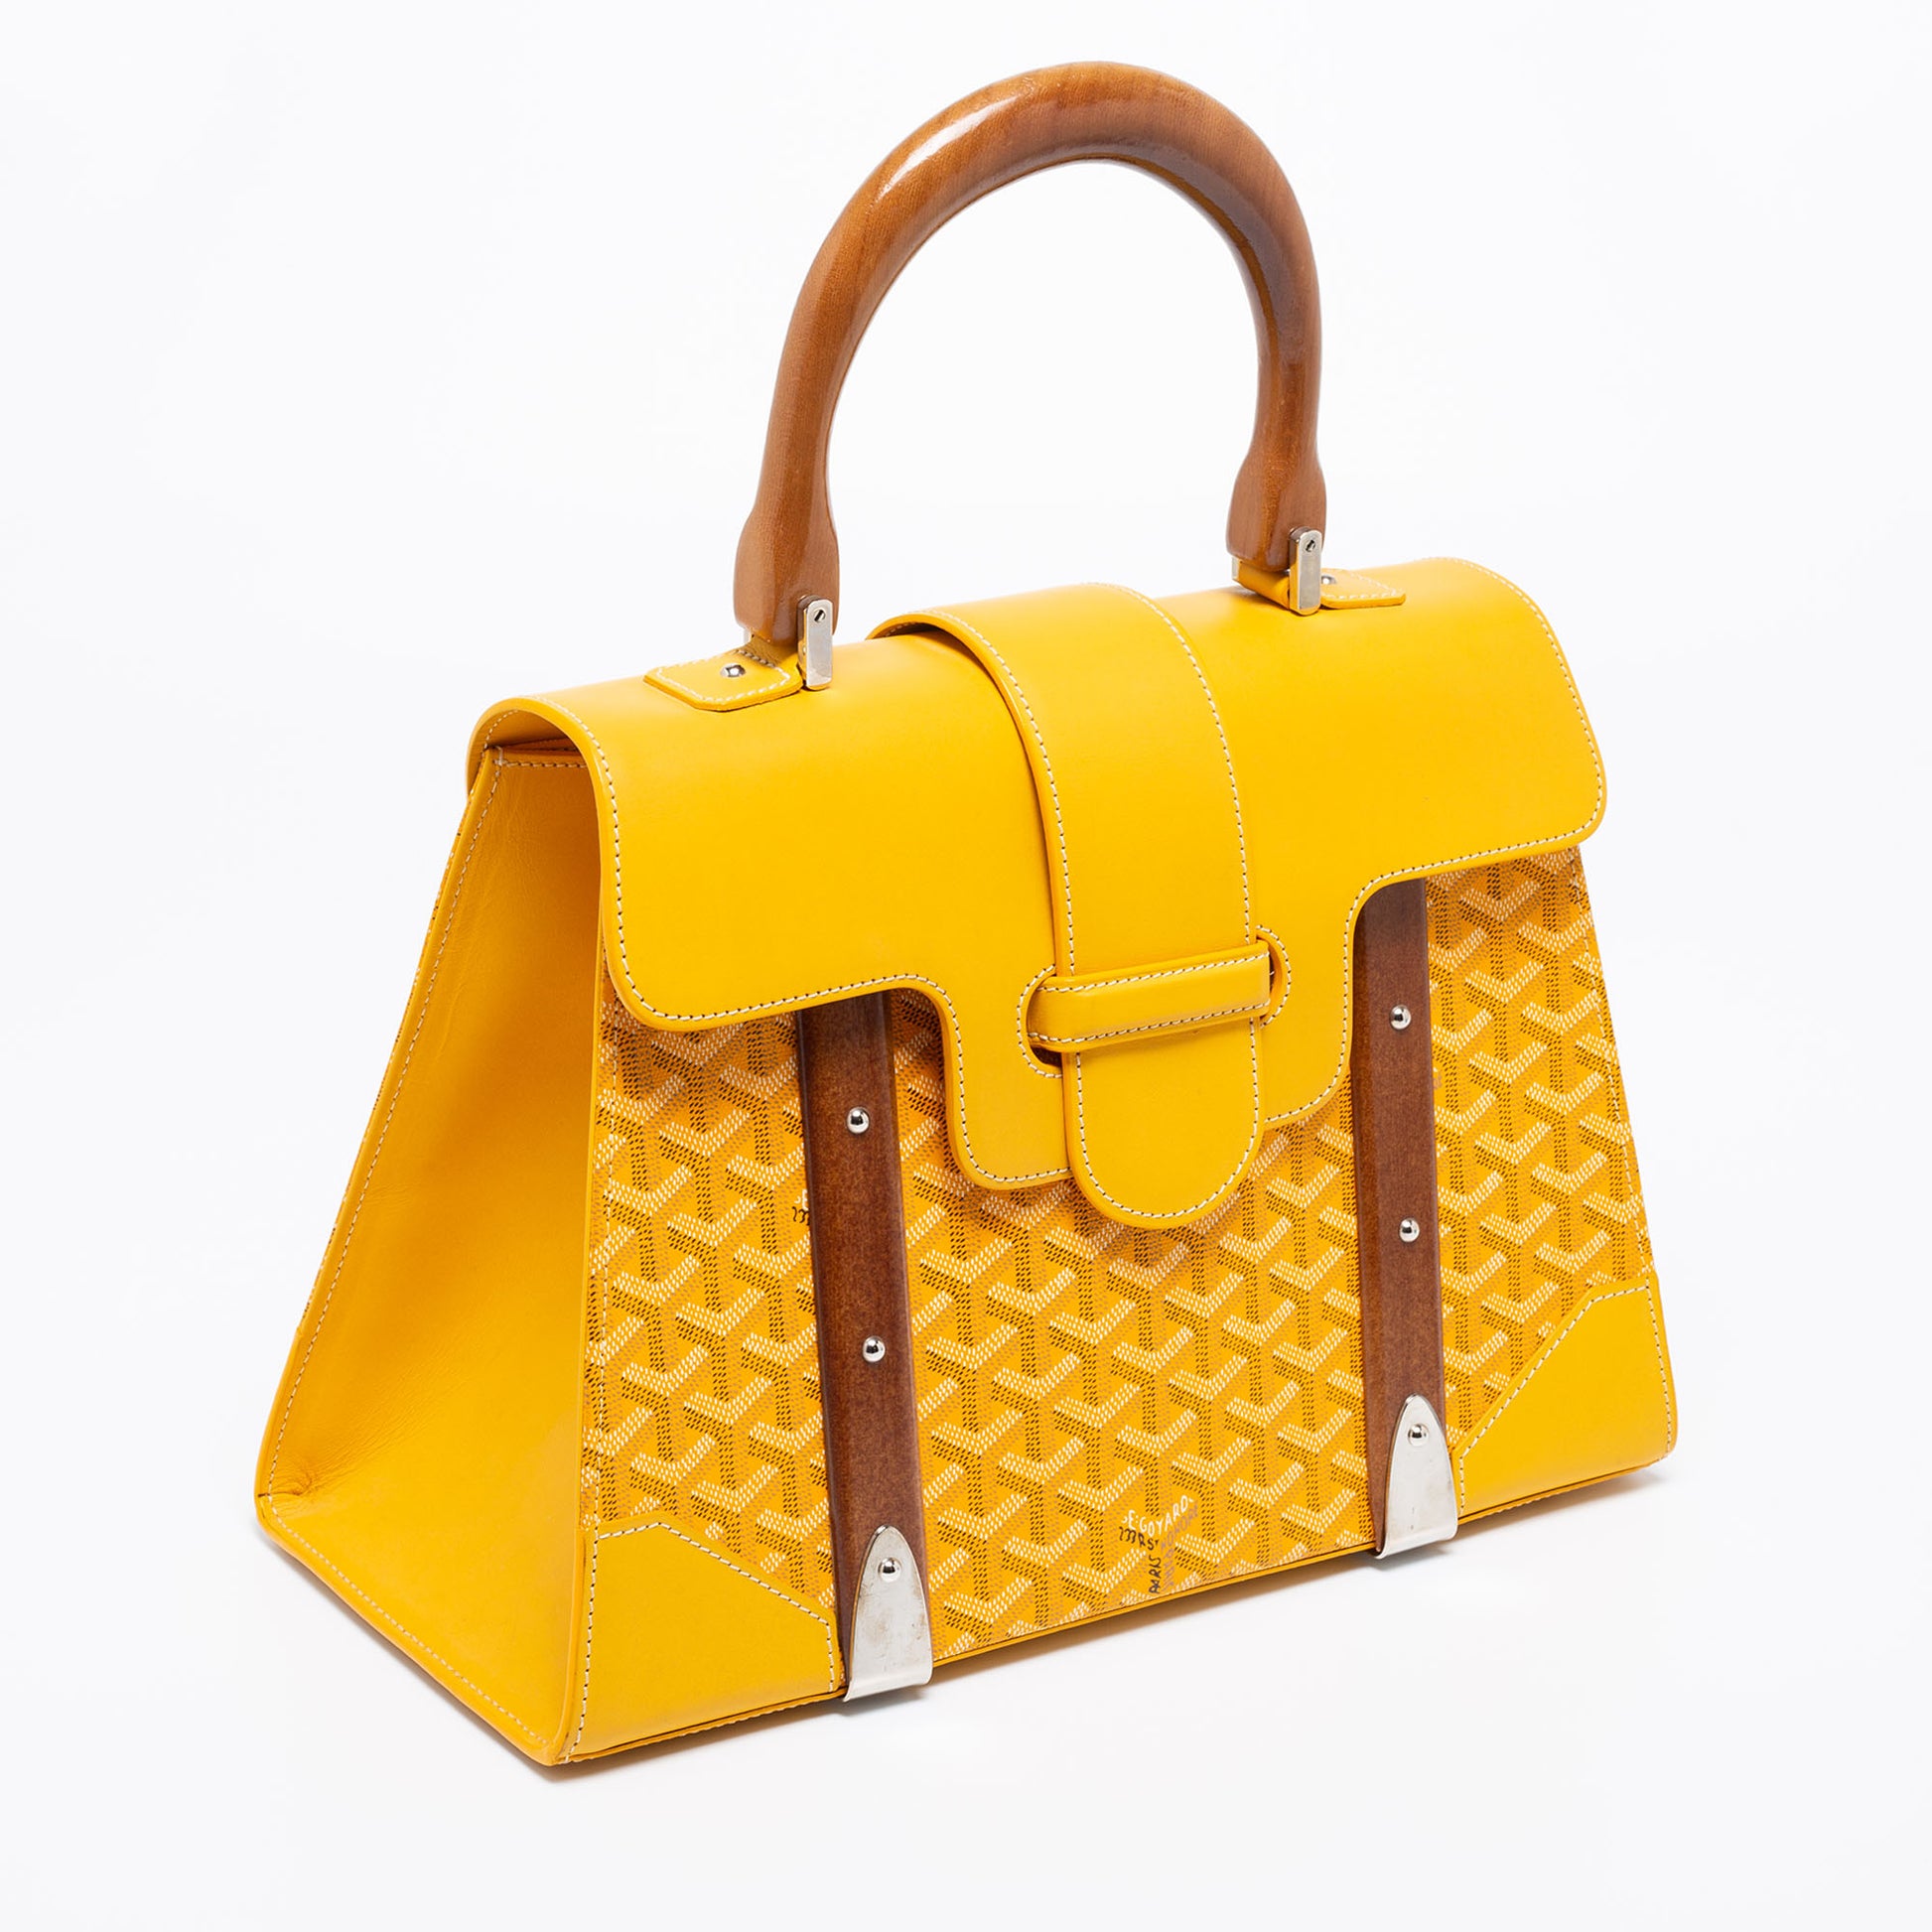 Goyard Bag Prices: Your Guide to Investing in Timeless Luxury in